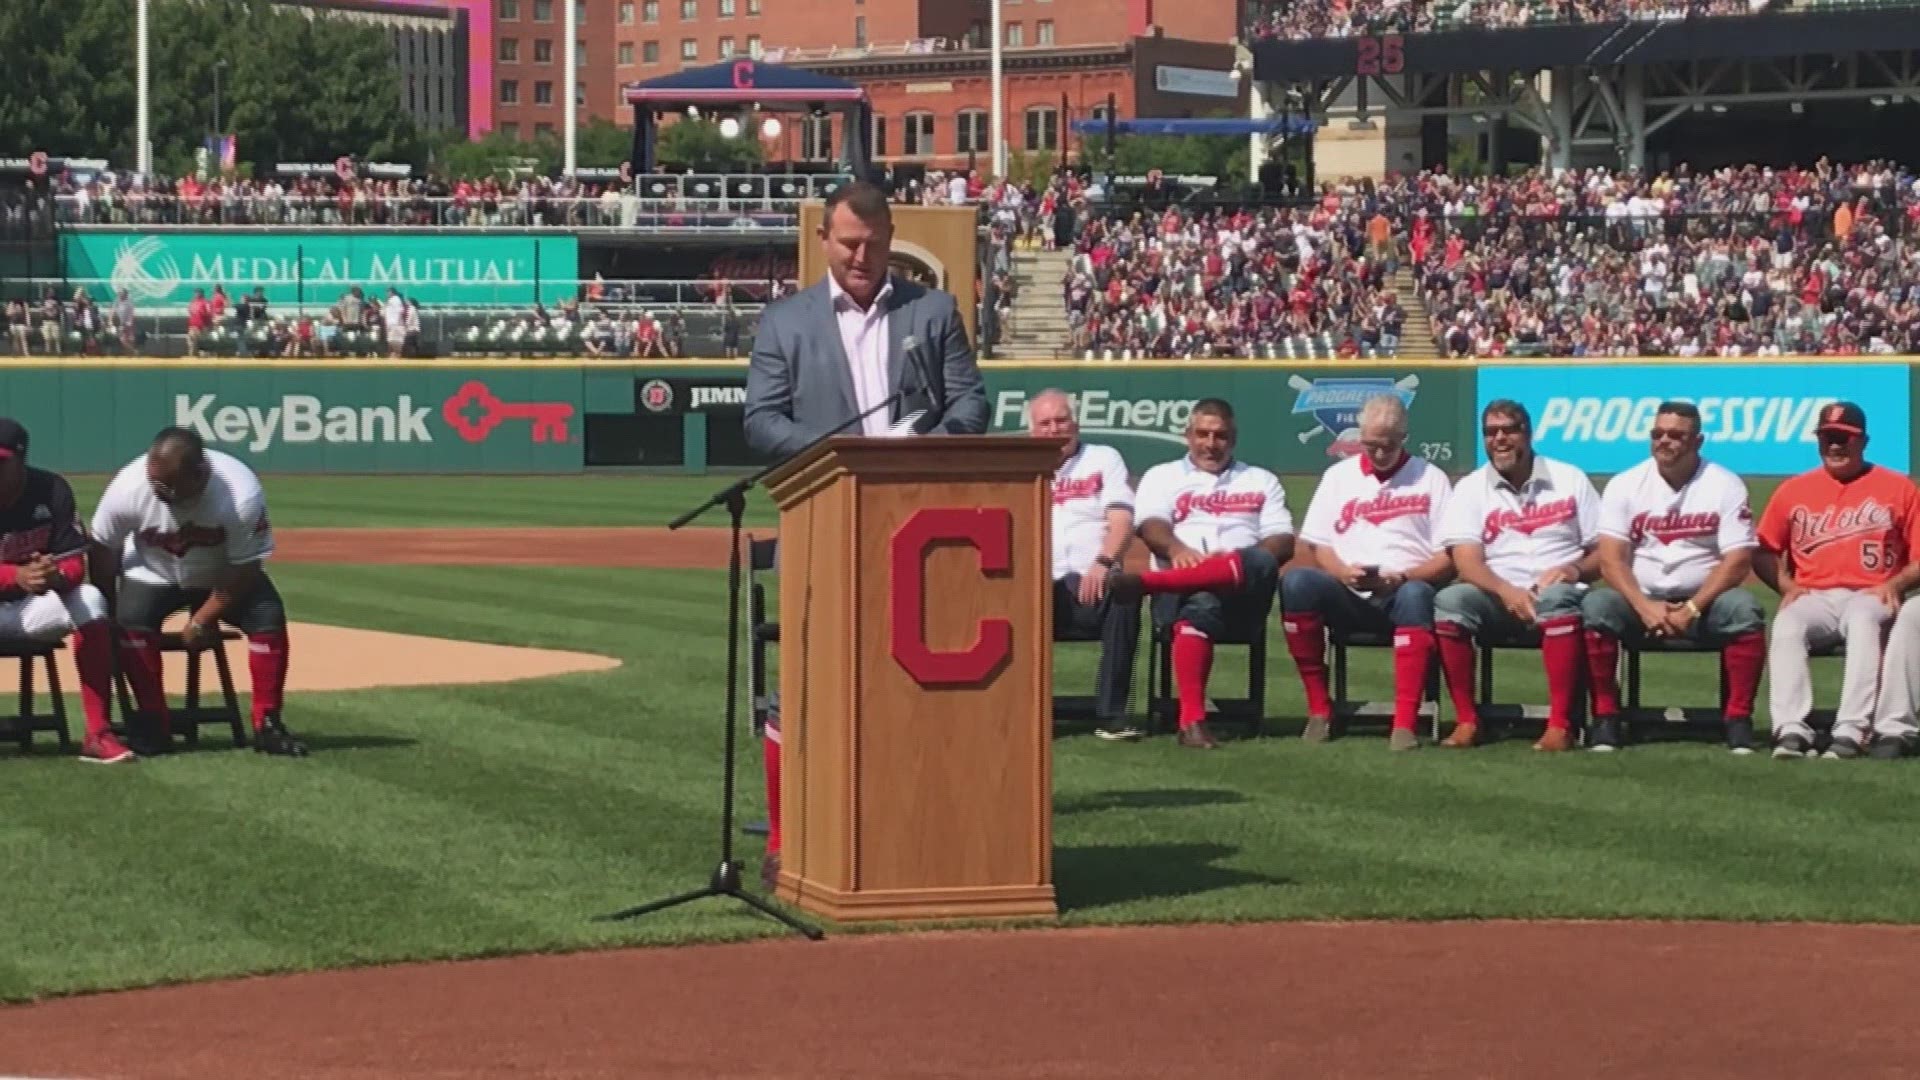 Jim Thome's speech at Progressive Field as the Cleveland Indians retired No. 25.